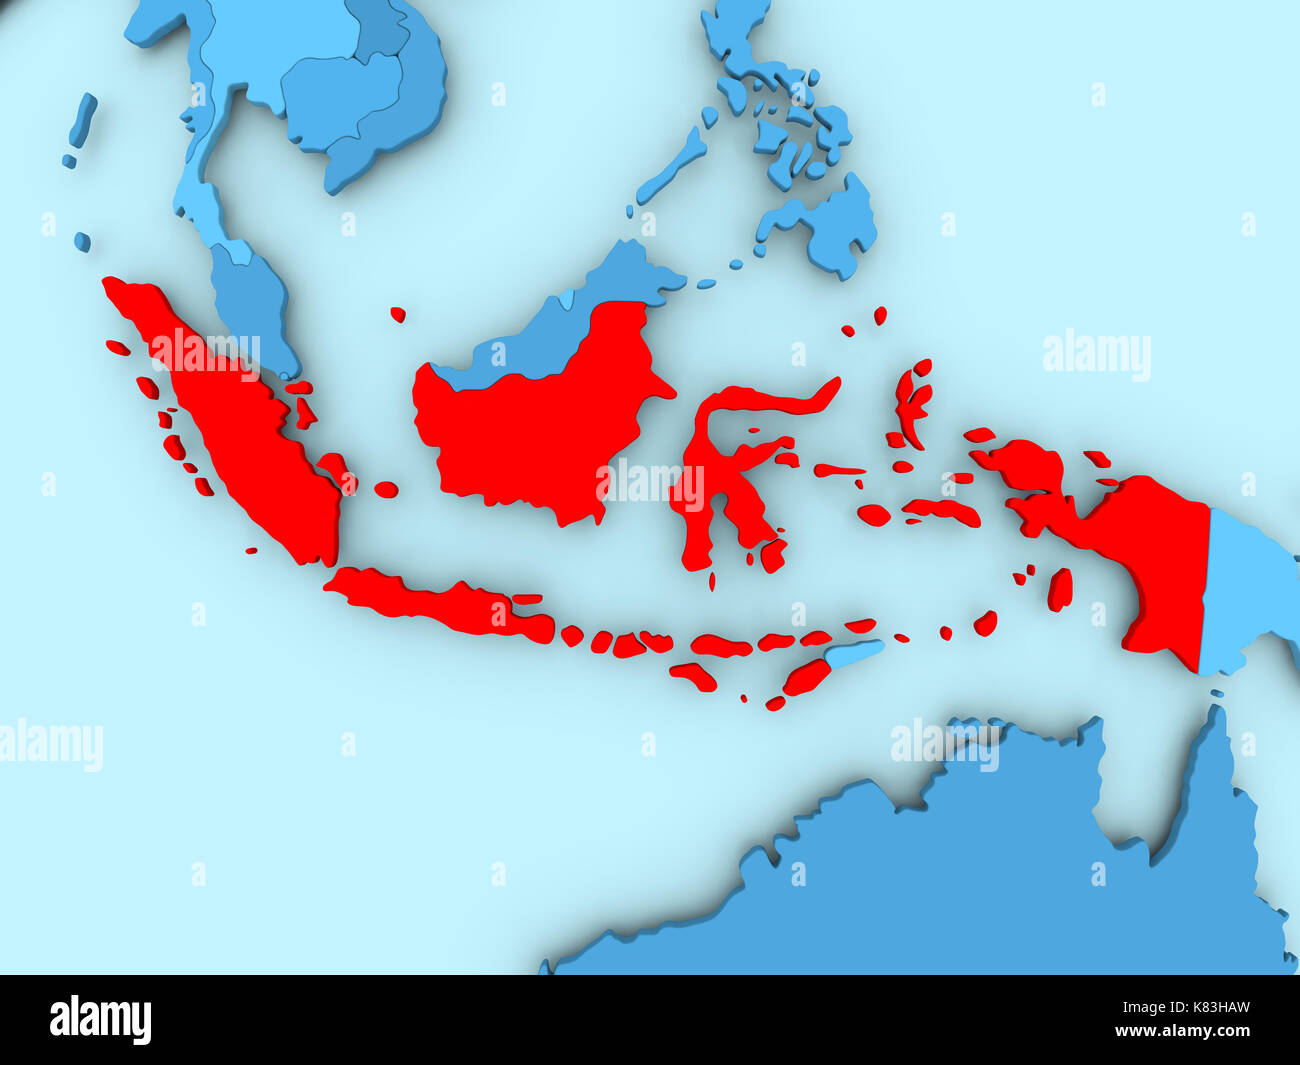 Indonesia in red on blue political map. 3D illustration. Stock Photo